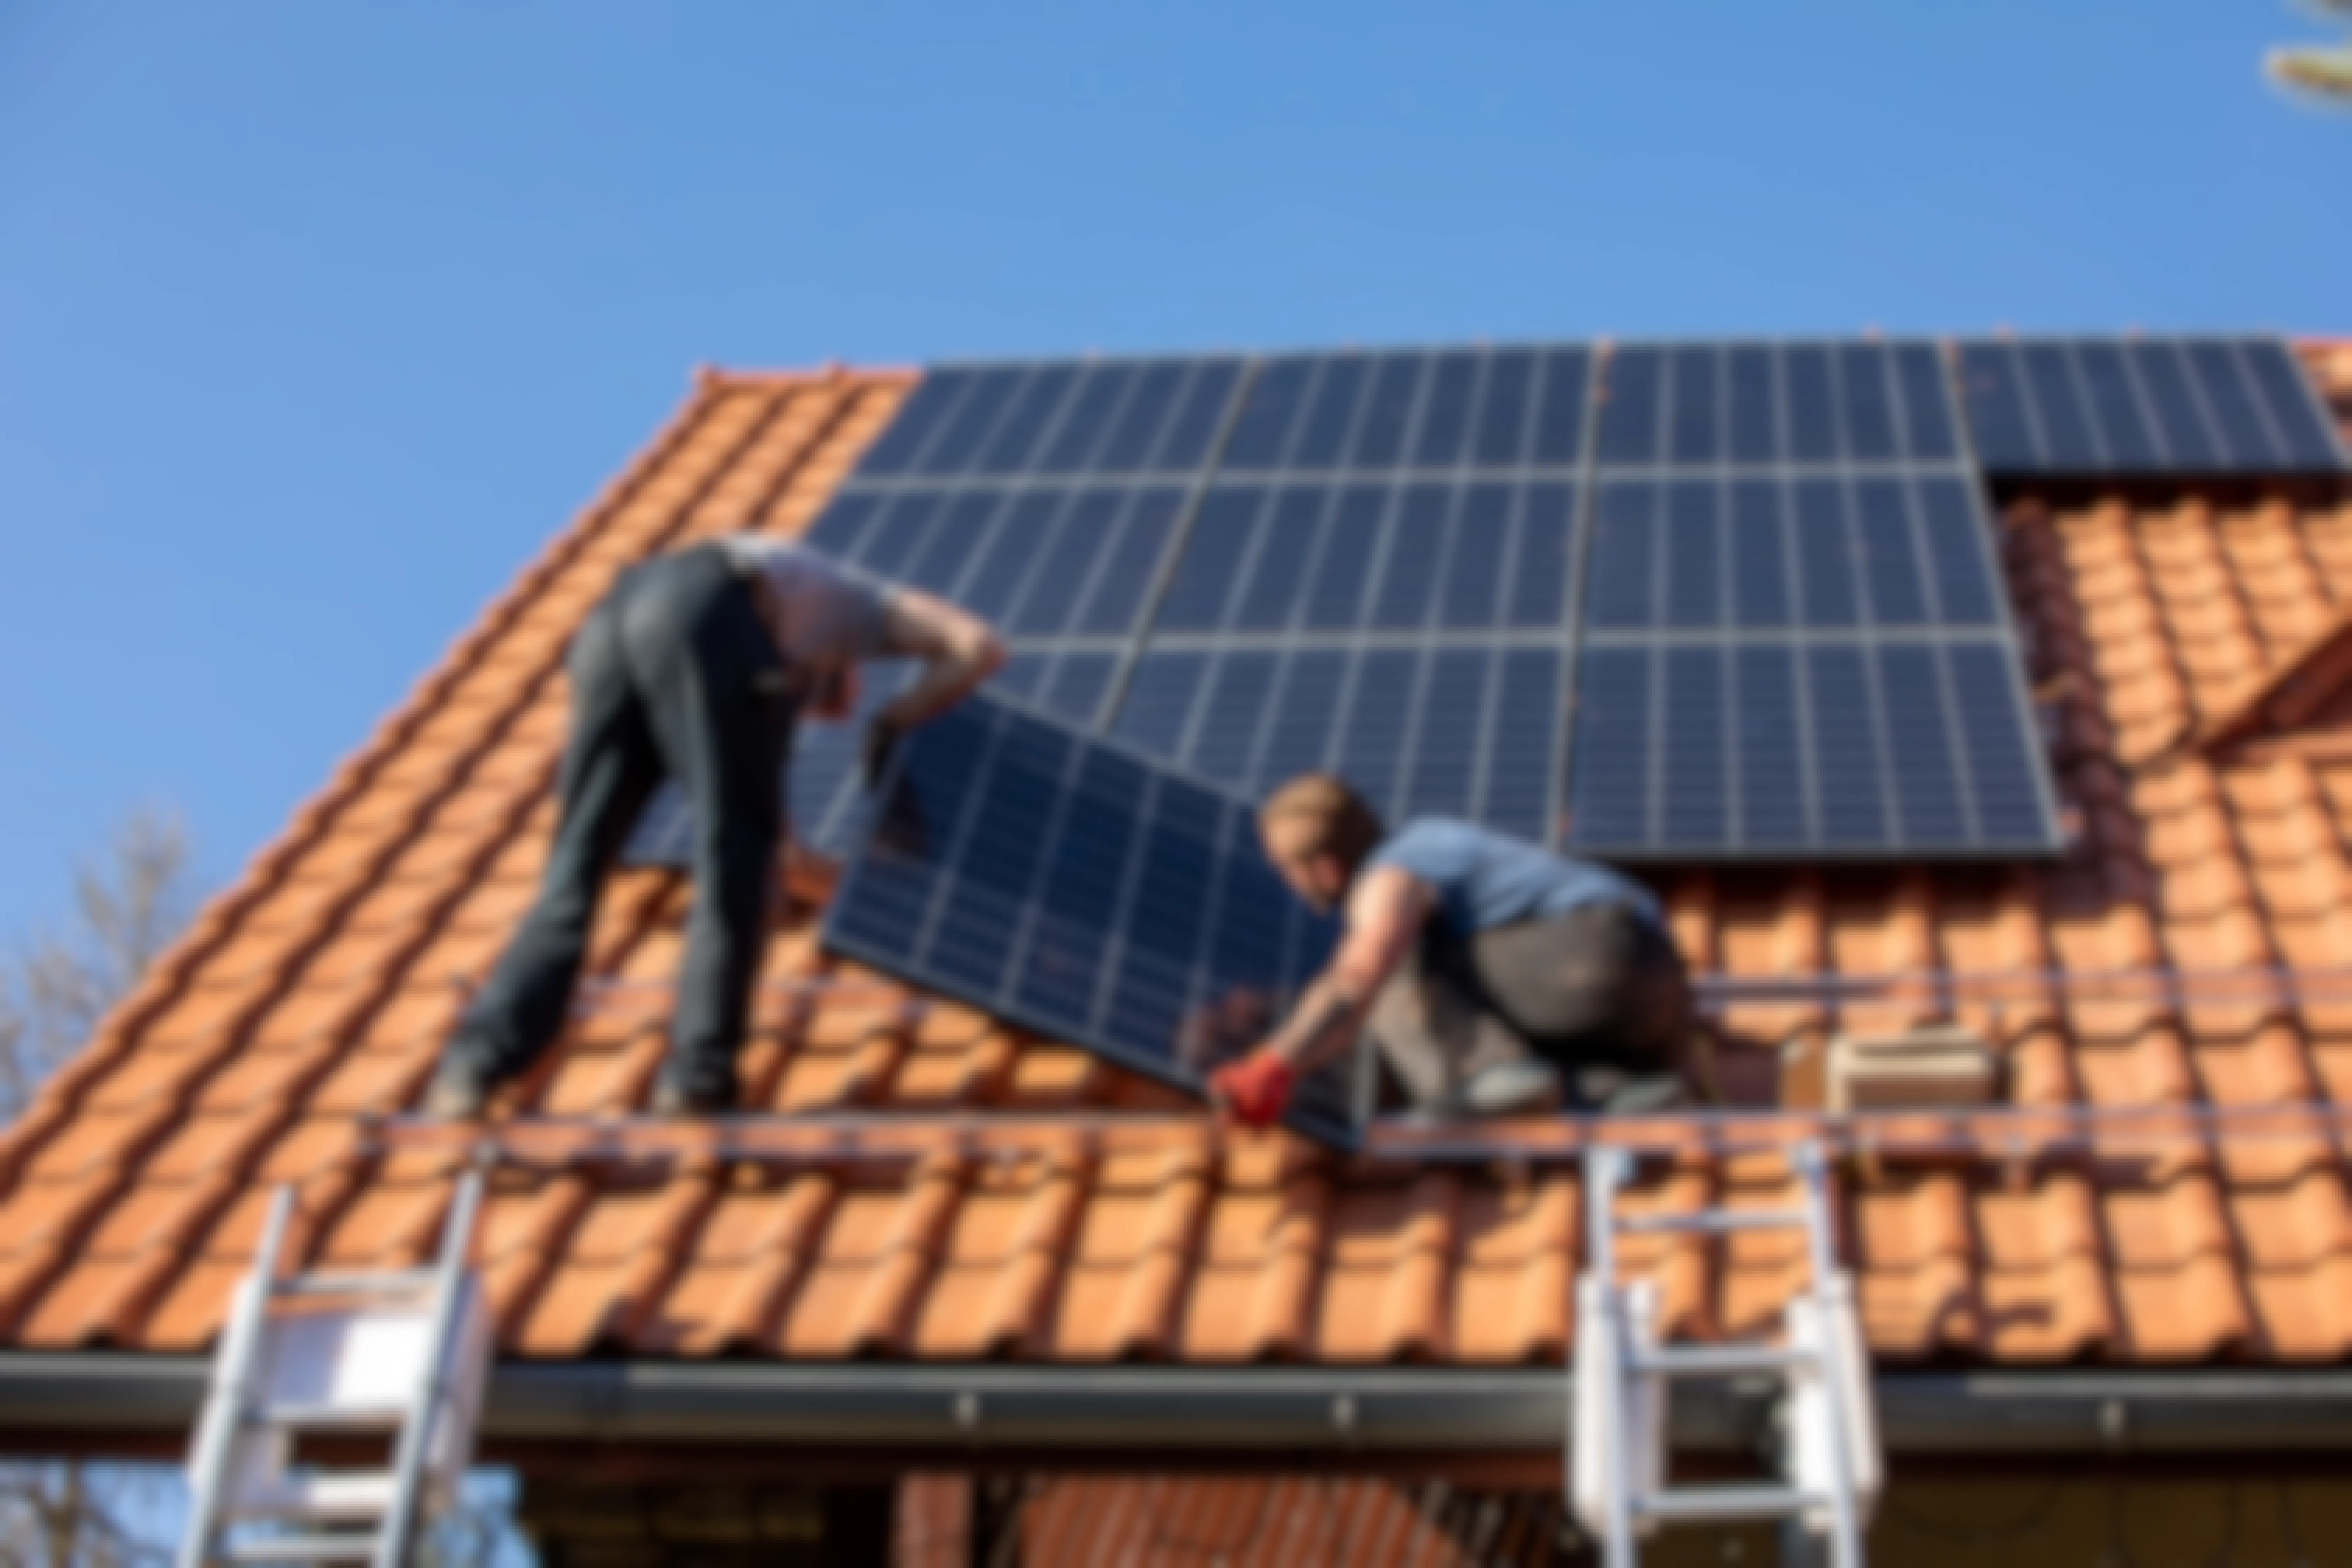 Two men installing solar panels onto the roof of a house.